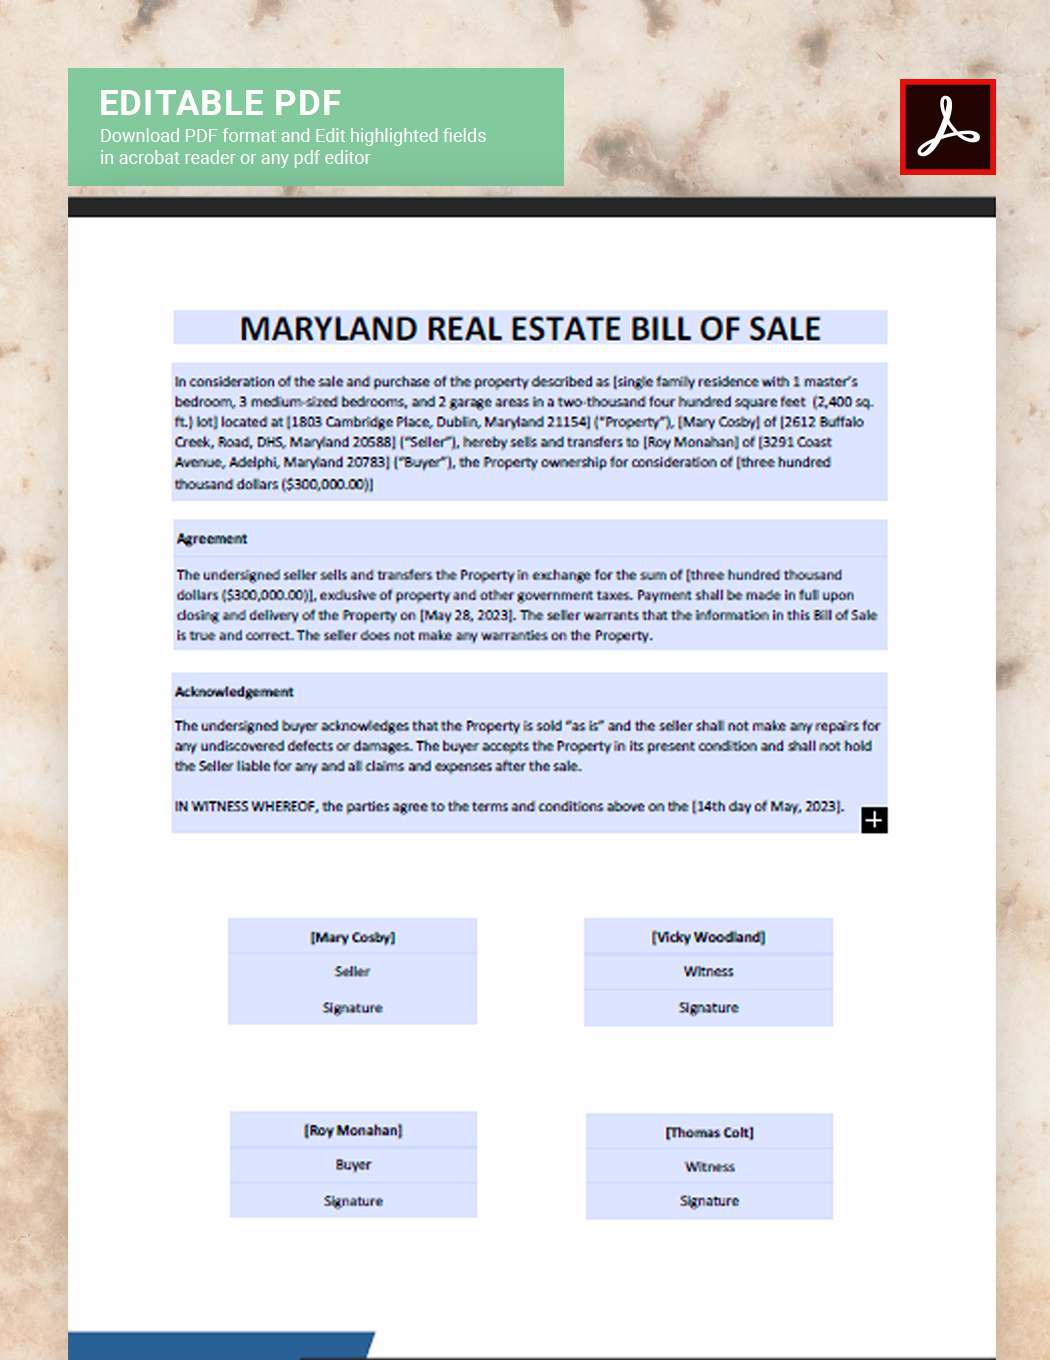 Maryland Real Estate Bill of Sale Template